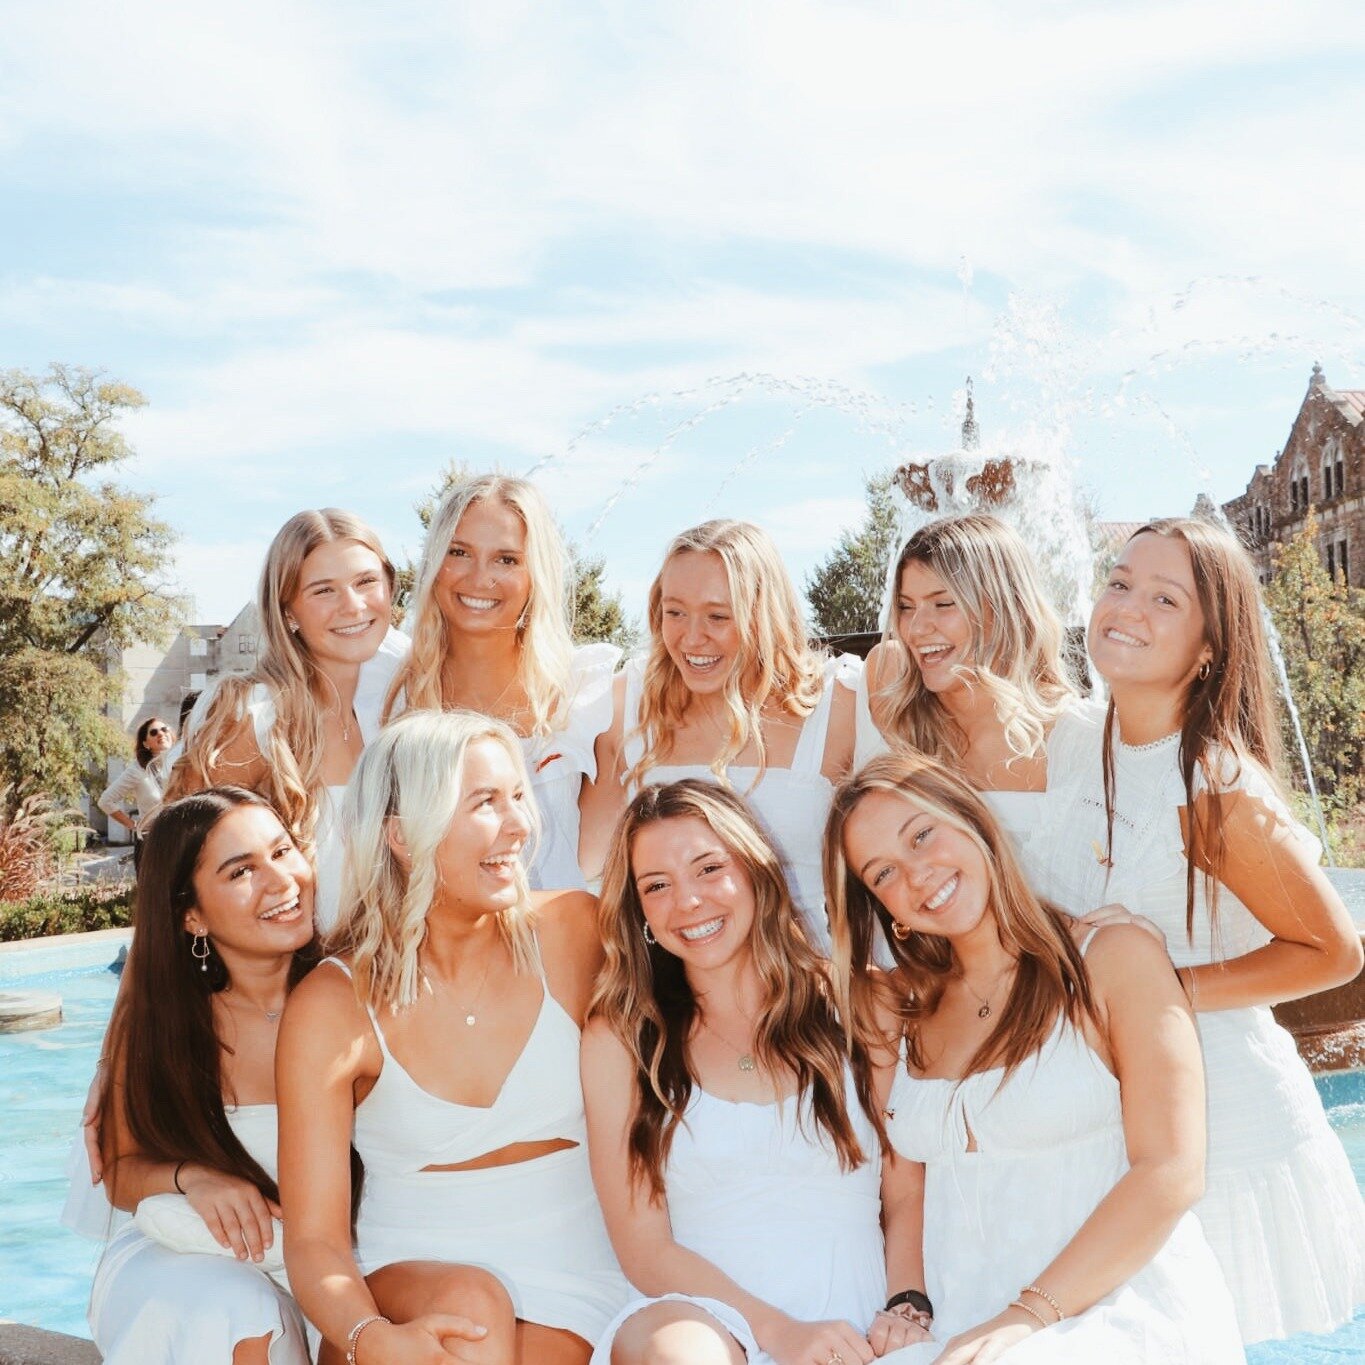 HAPPY FOUNDERS DAY @kansaschiomega 
 Chi Omega is celebrating 129 years of sisterhood with the motto &quot;Sisters on purpose.&quot; Today they honor their pillars of friendship, service to others, campus involvement, and personal development.🤍✨